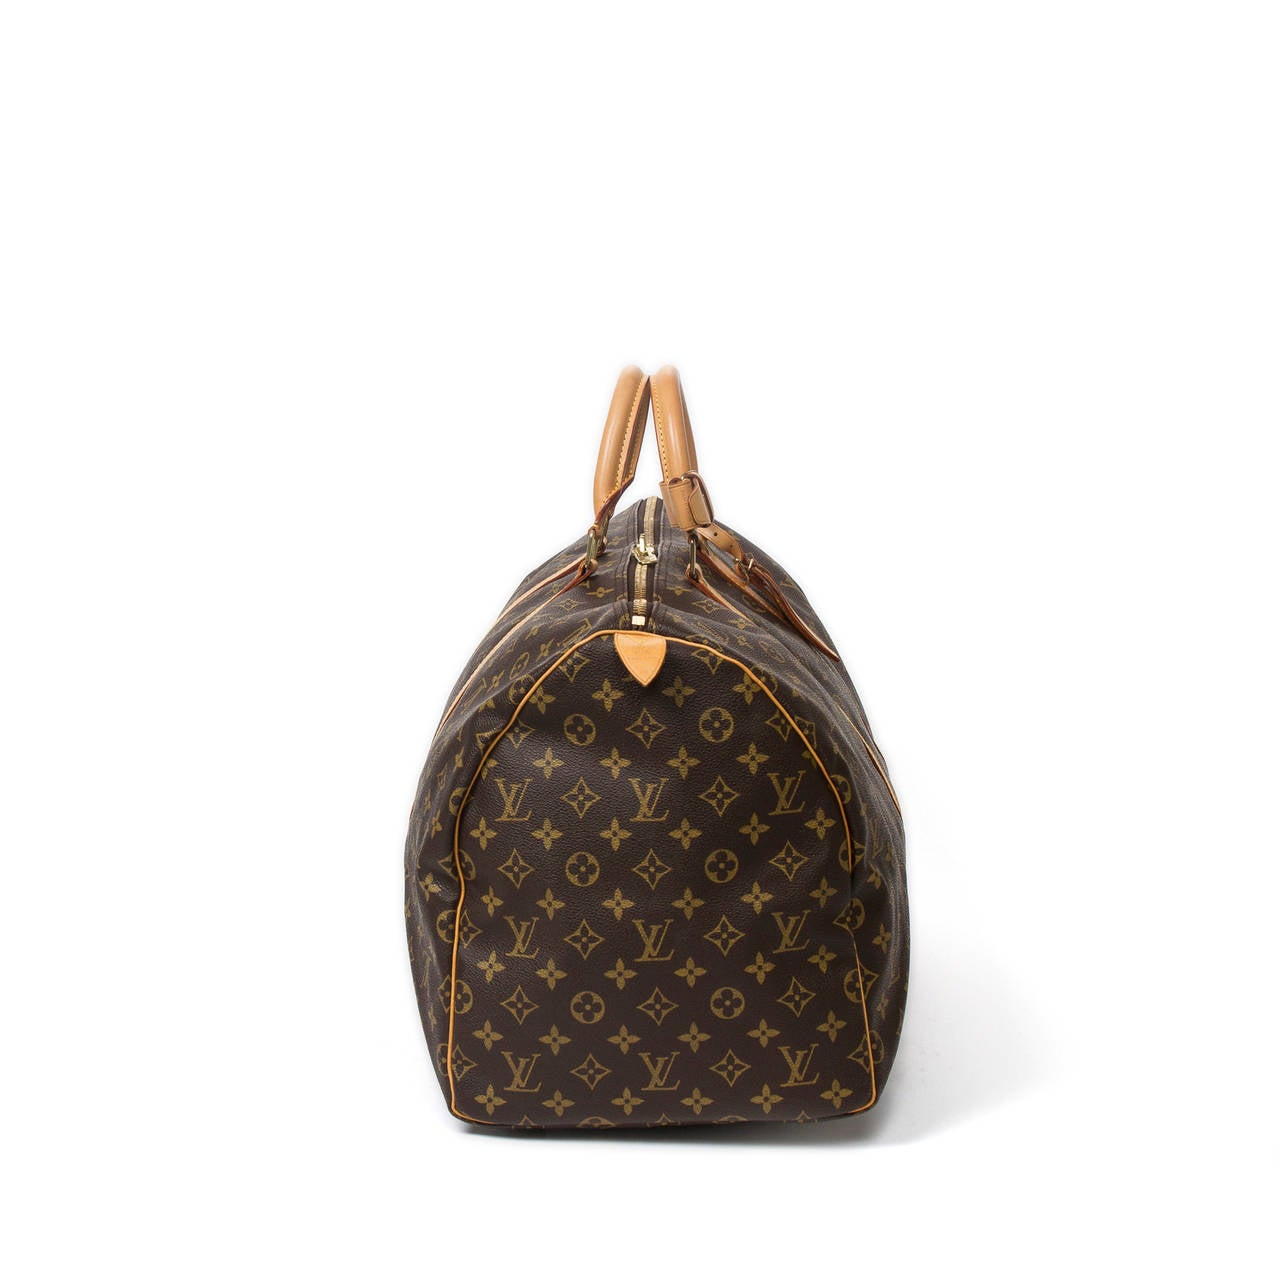 Louis Vuitton Keepall 55 Monogram In Excellent Condition For Sale In Dublin, IE